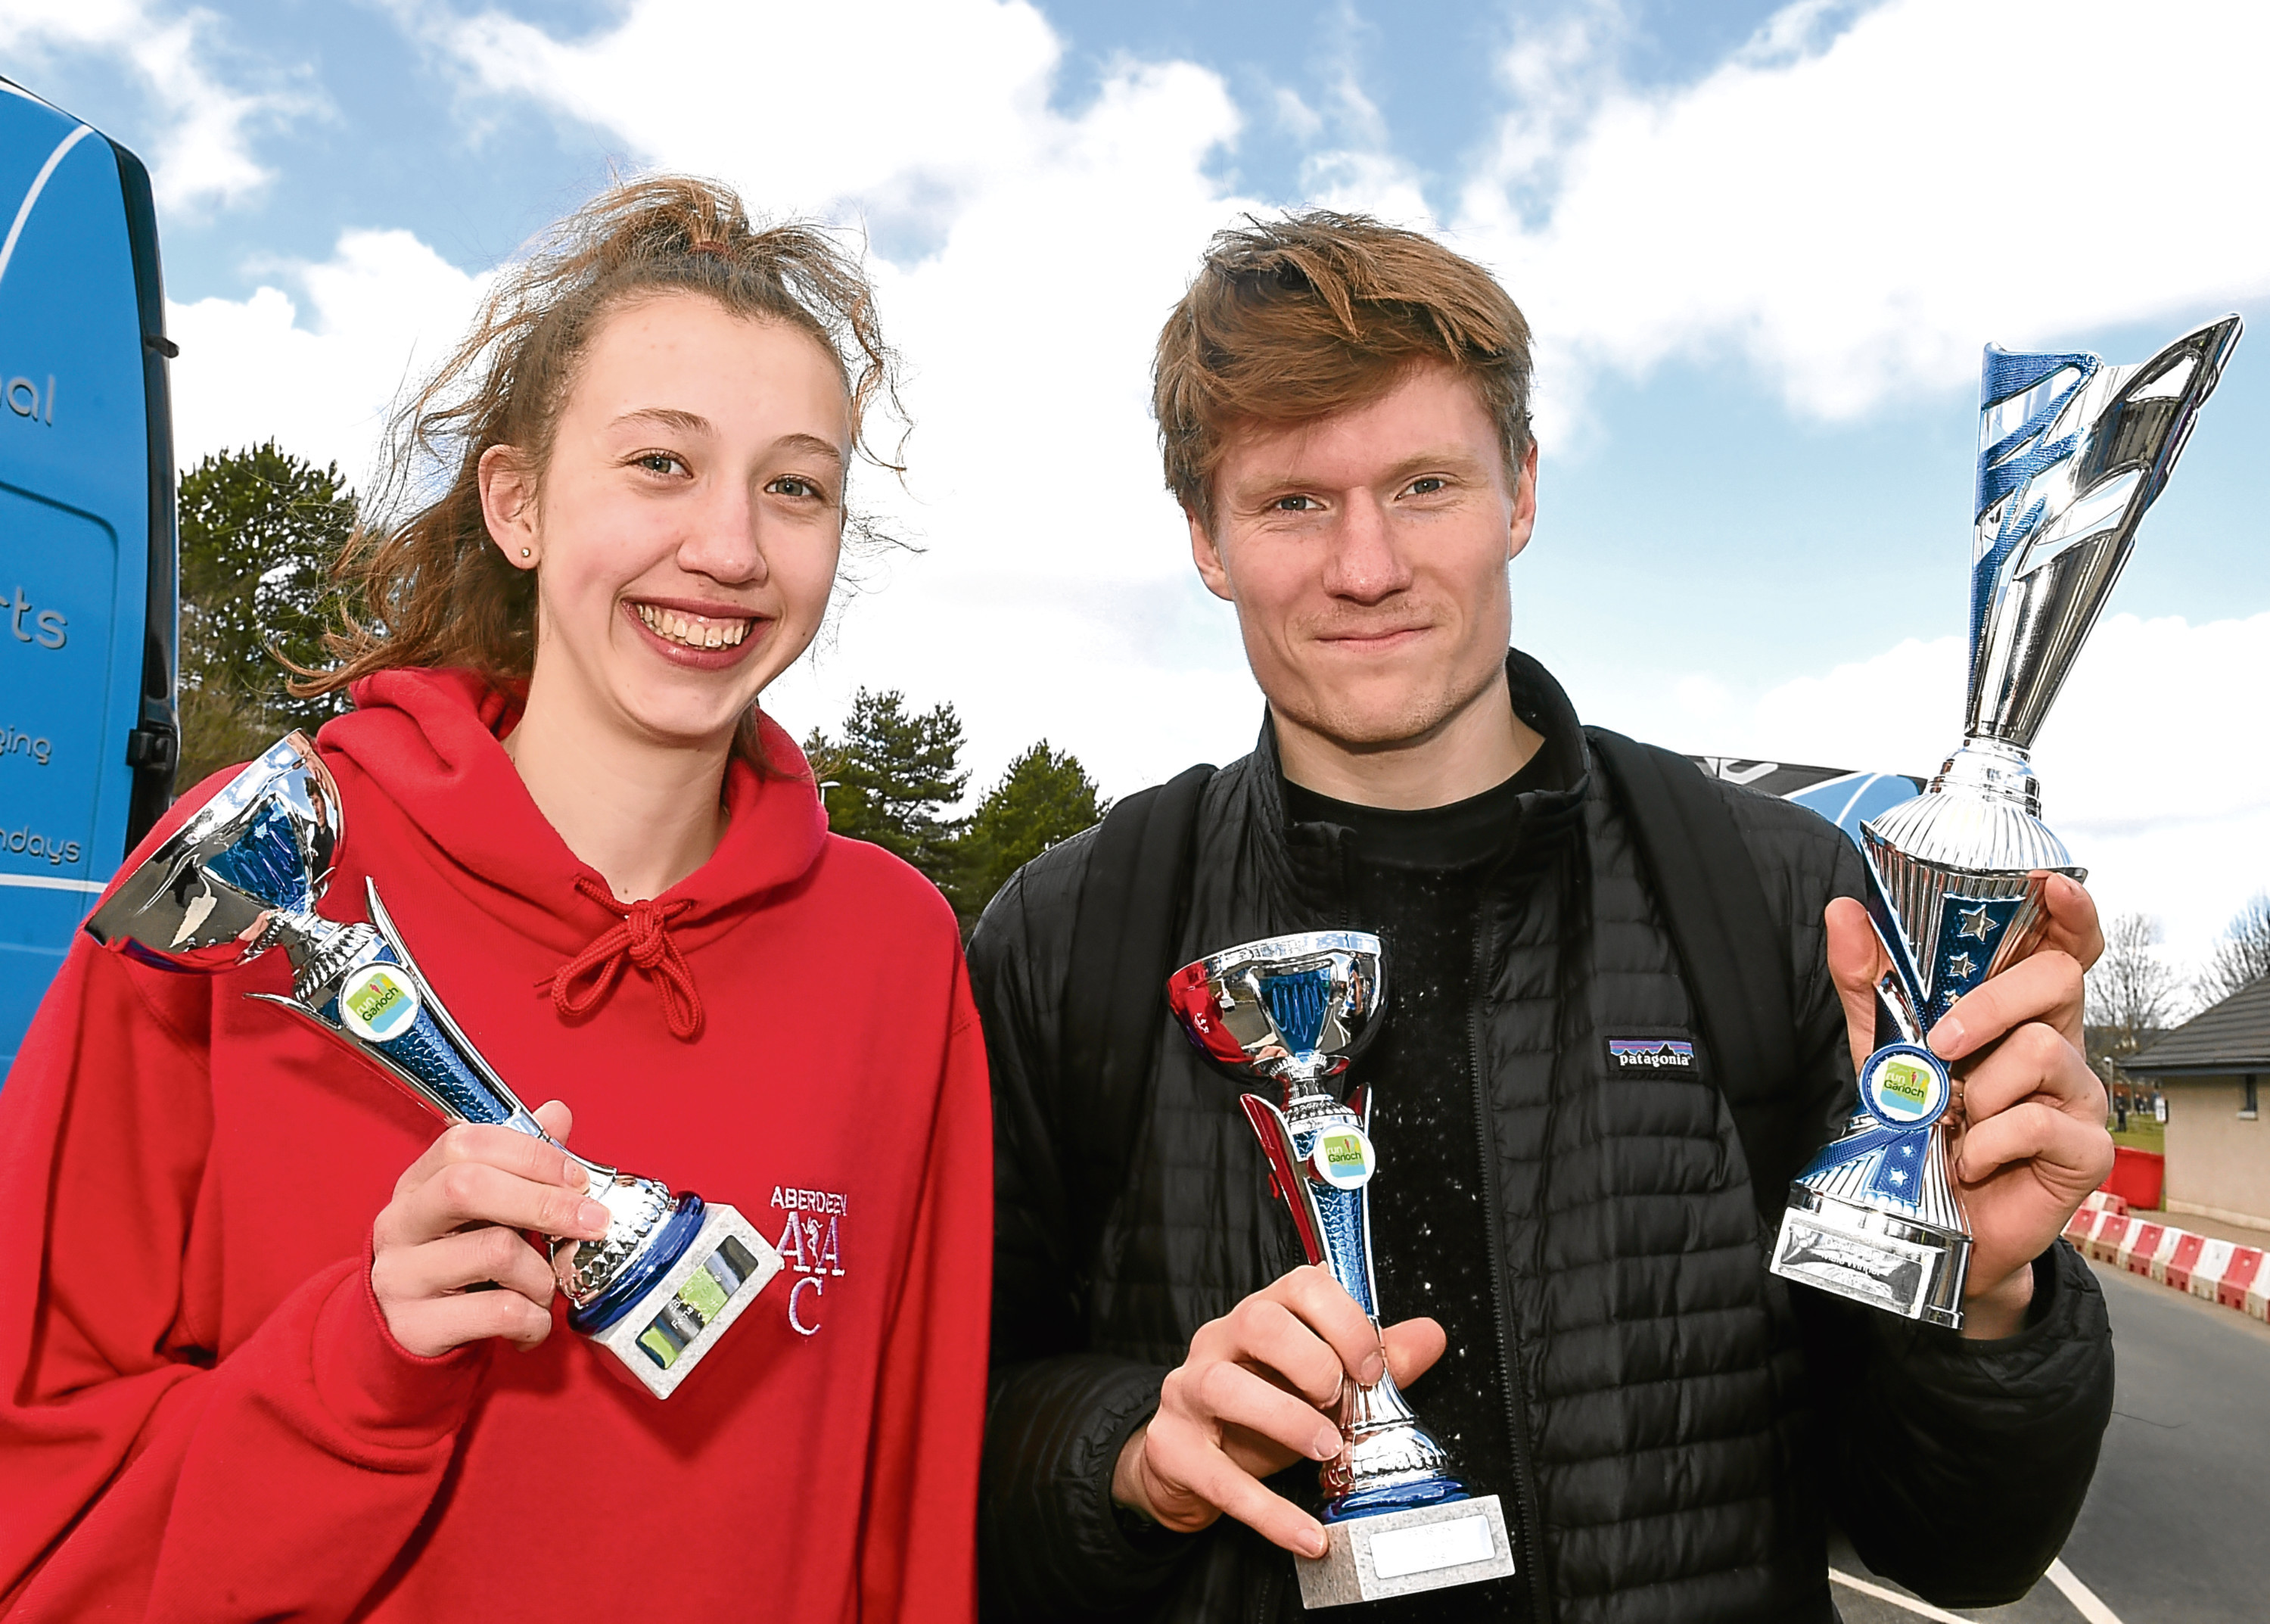 The Run Garioch race day at Inverurie. In the picture are hannah Mutch, 5K winner and Callum Symmons, 5K and 10K winner.